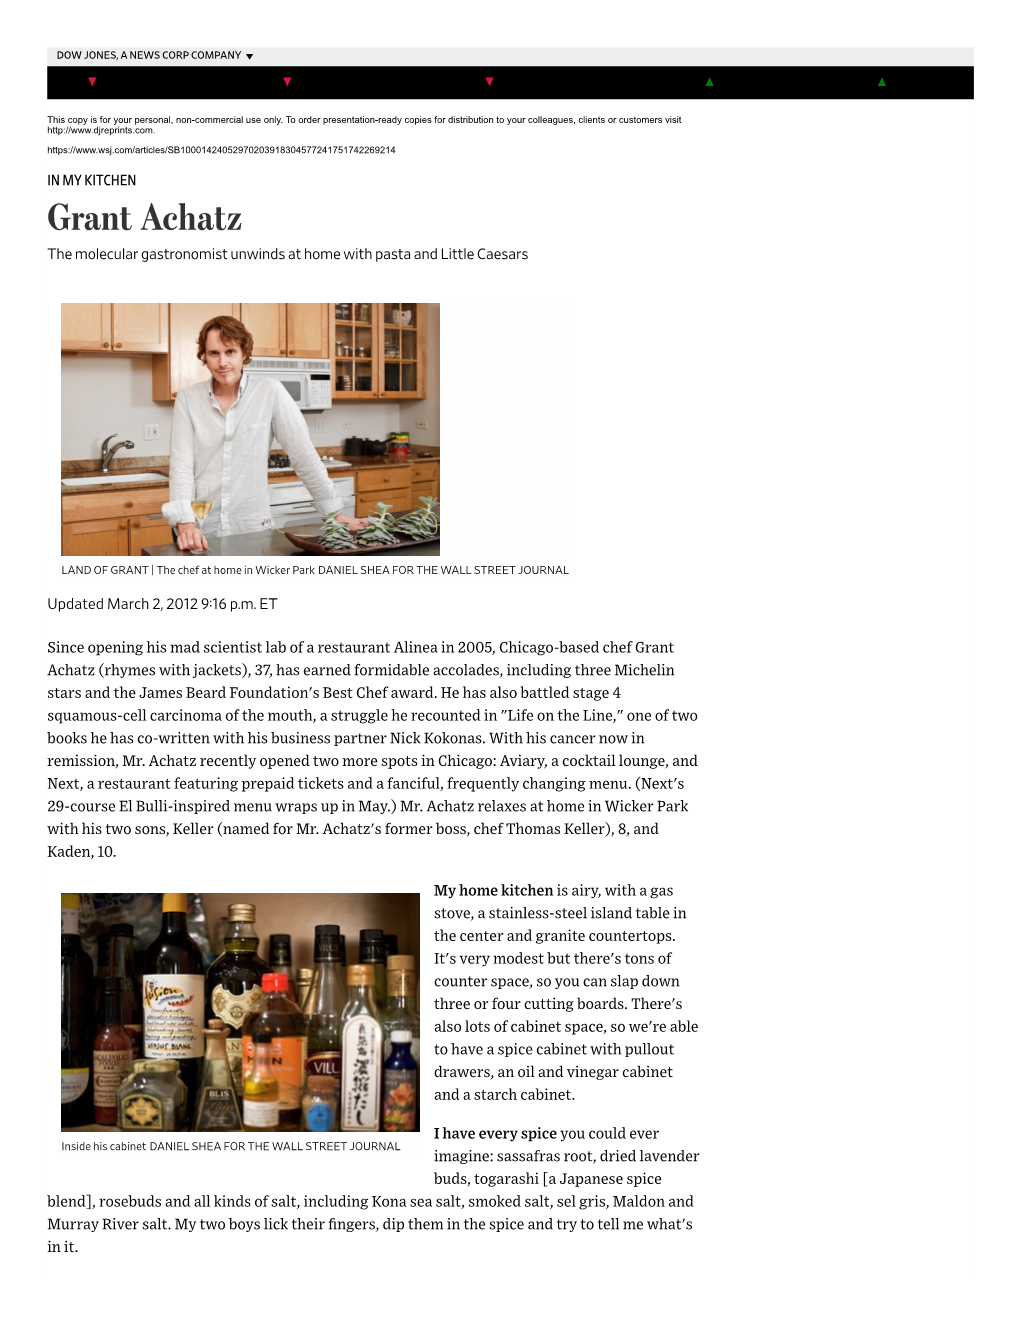 Grant Achatz the Molecular Gastronomist Unwinds at Home with Pasta and Little Caesars